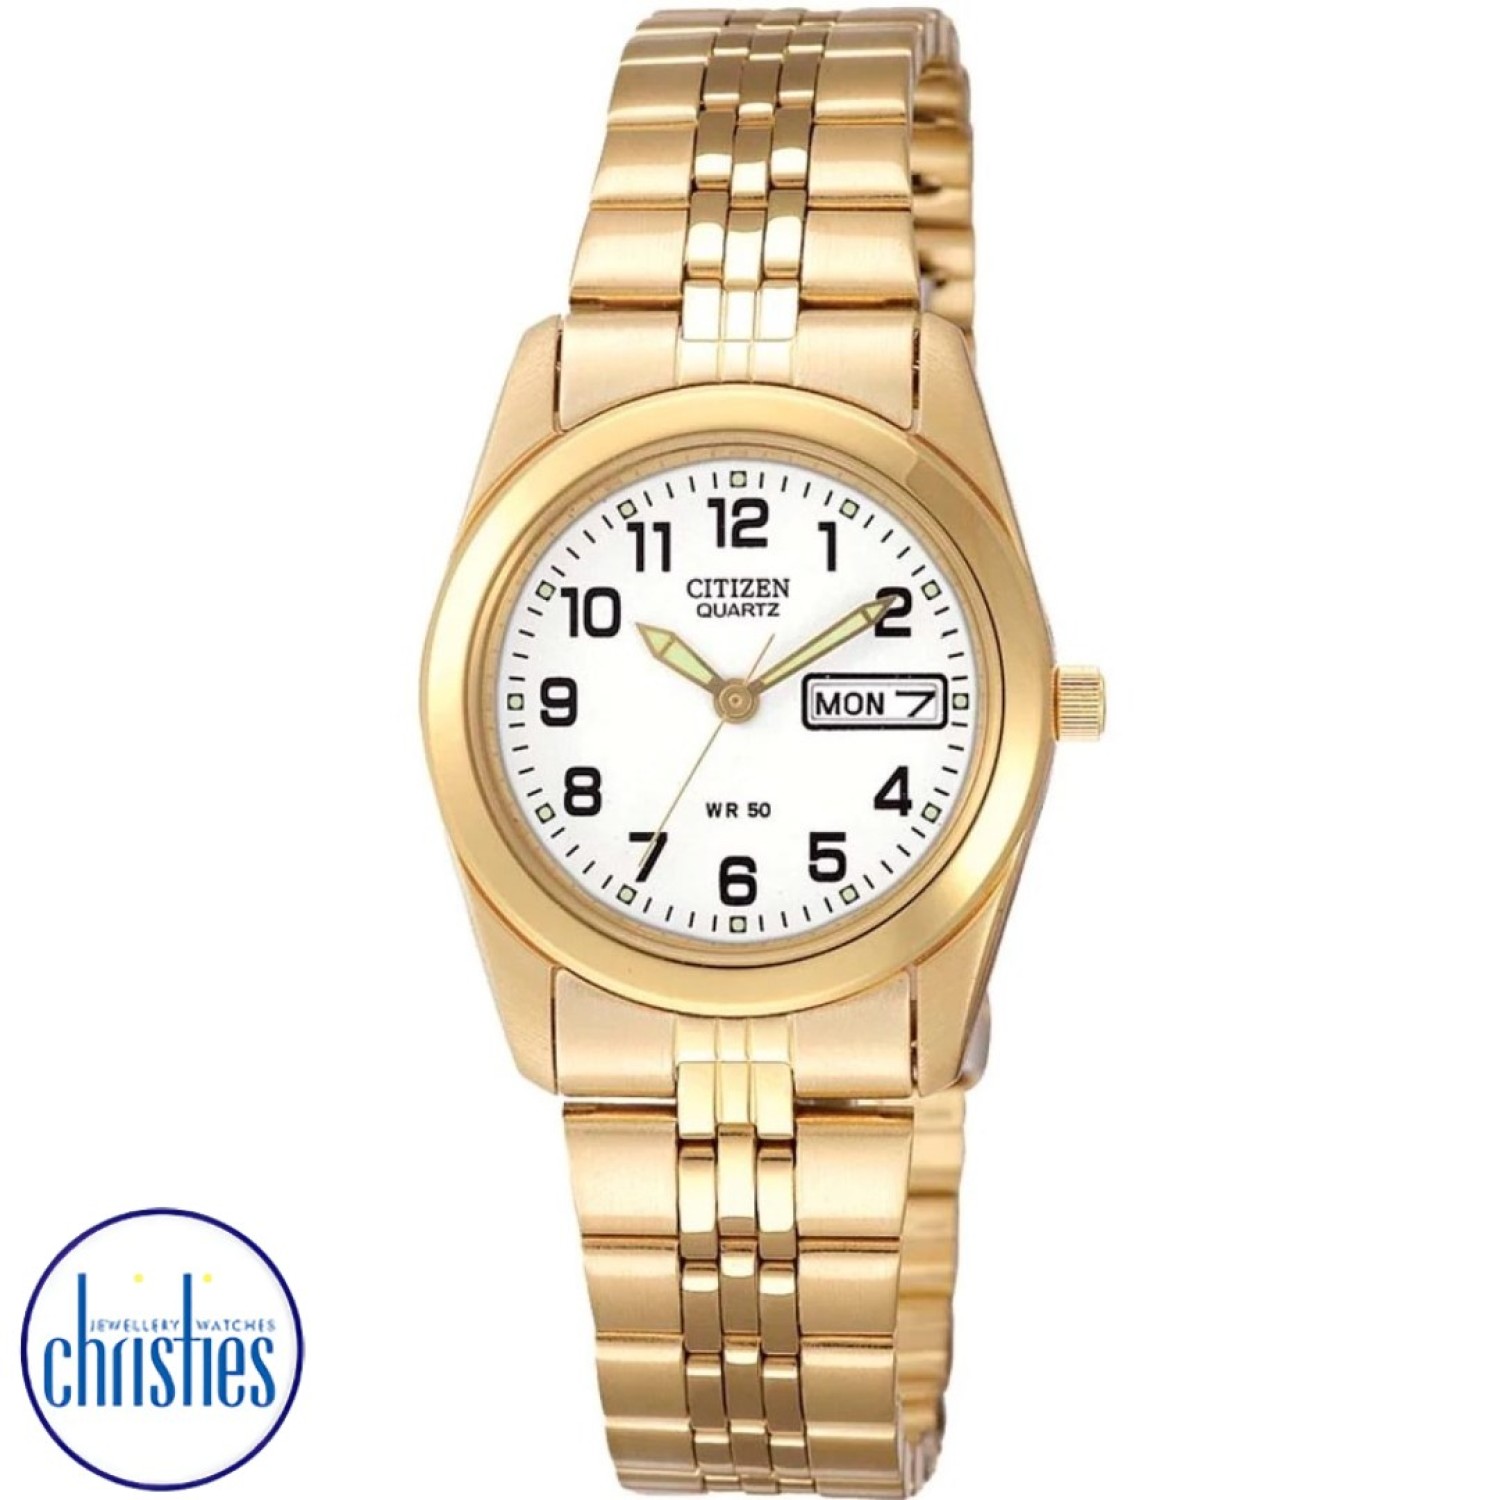 EQ0512-52B Citizen Watch Ladies. A gold-toned durable stainless steel case and bracelet complement this demure accessory. Featuring quality quartz accuracy, a three-year battery, day/date display and water resistance suitable for still water swimming, t @